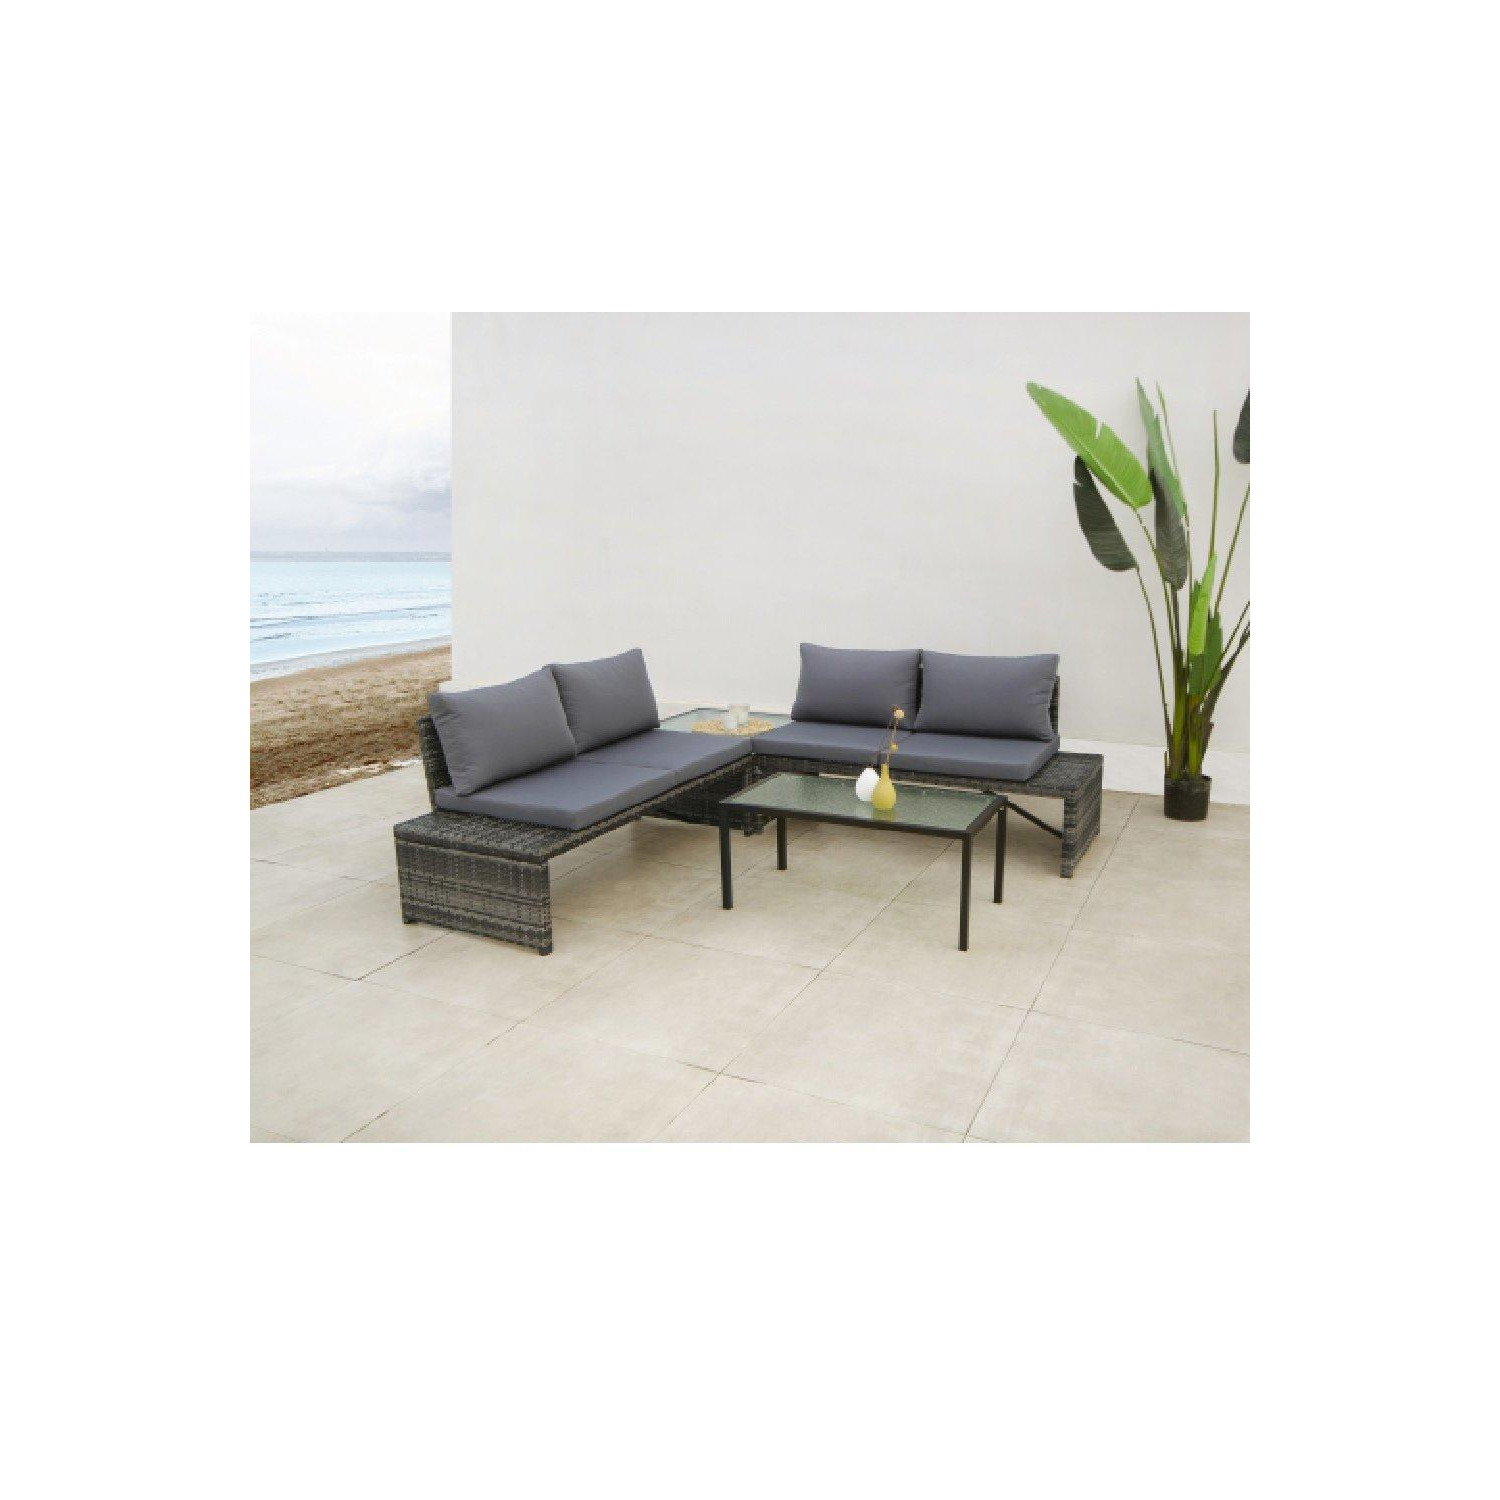 Filippo Rattan Lounge Set with Tempered Glass Table Top - image 1